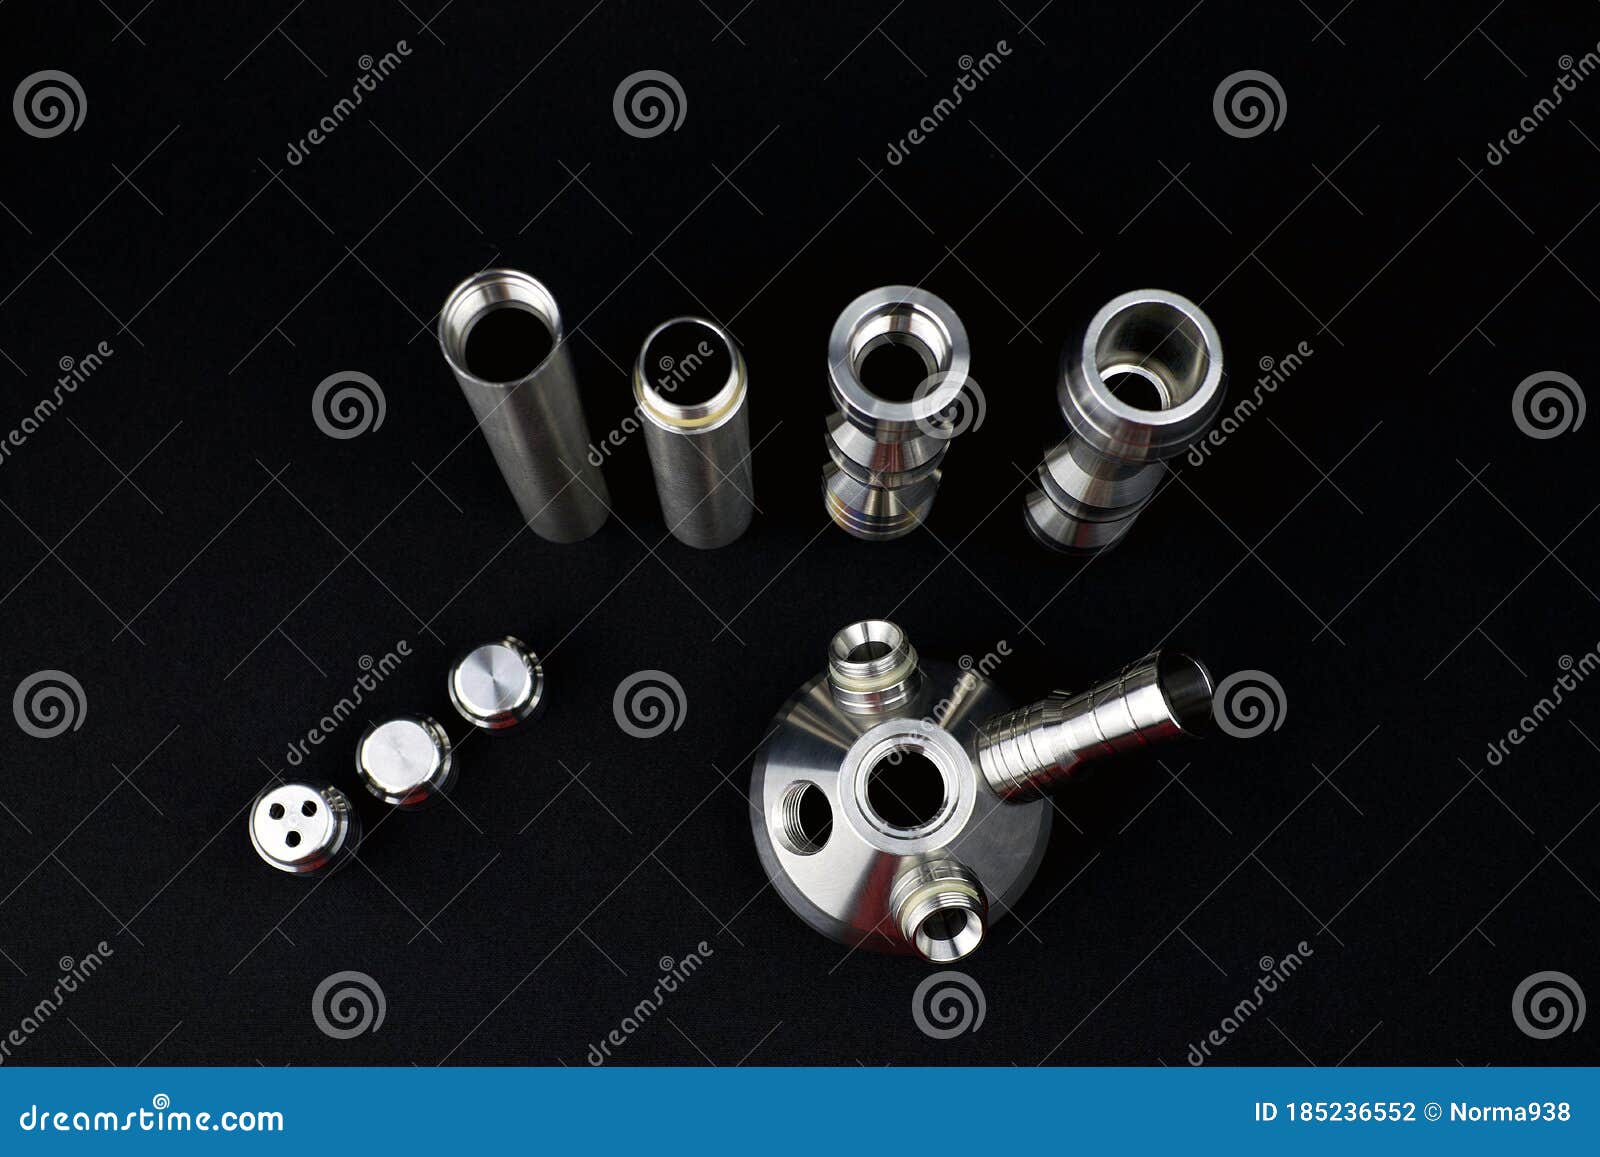 disassemble hookah shaft made of stainless steel. various components of the hookah shaft